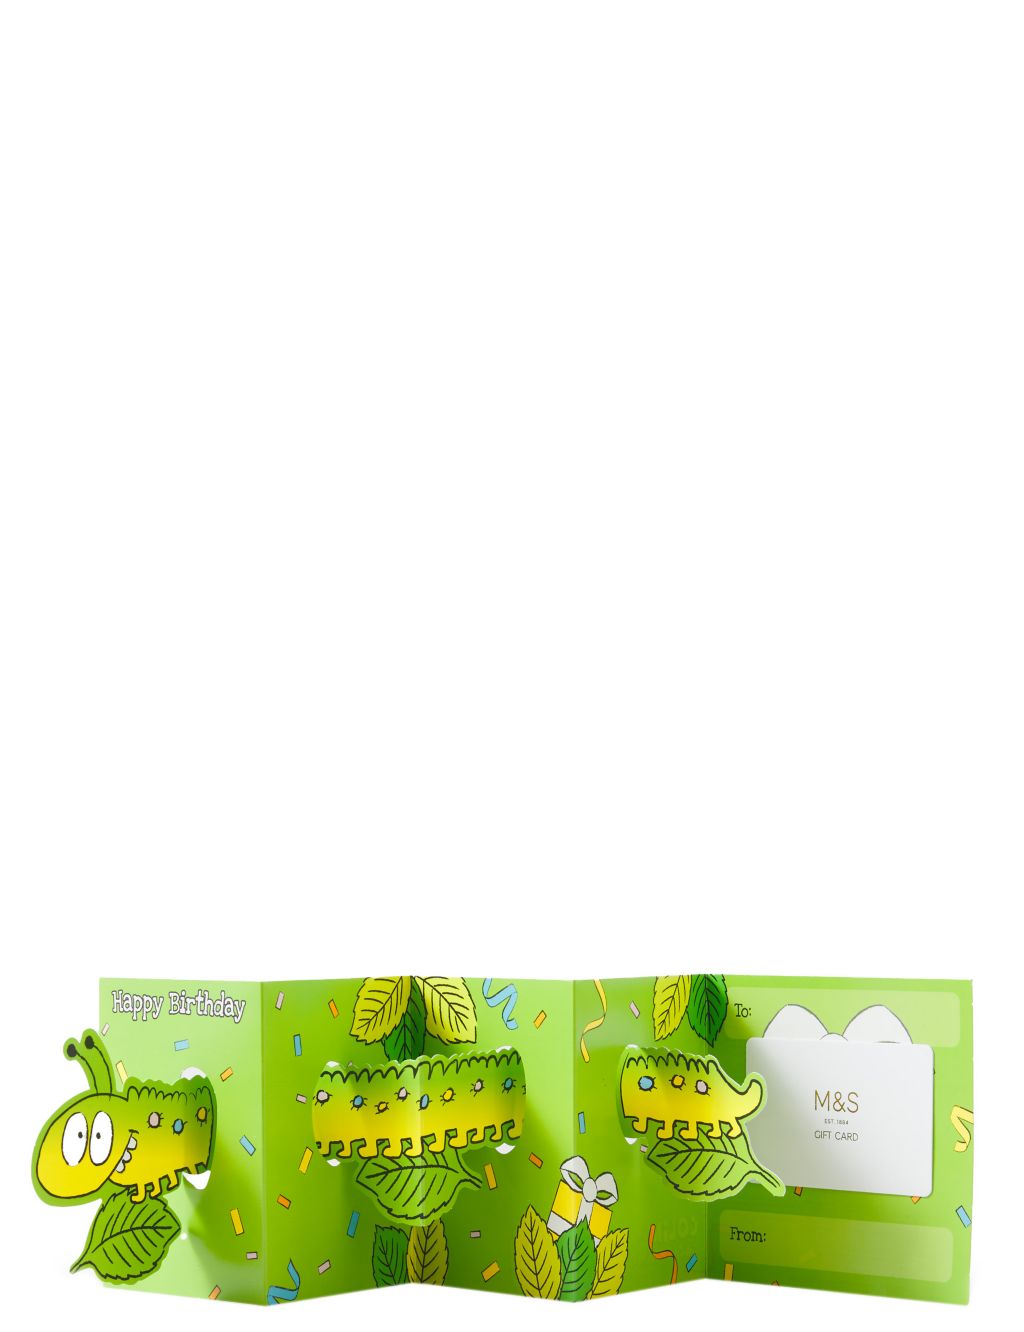 Colin the Caterpillar™ 3D pop out Gift Card 1 of 5